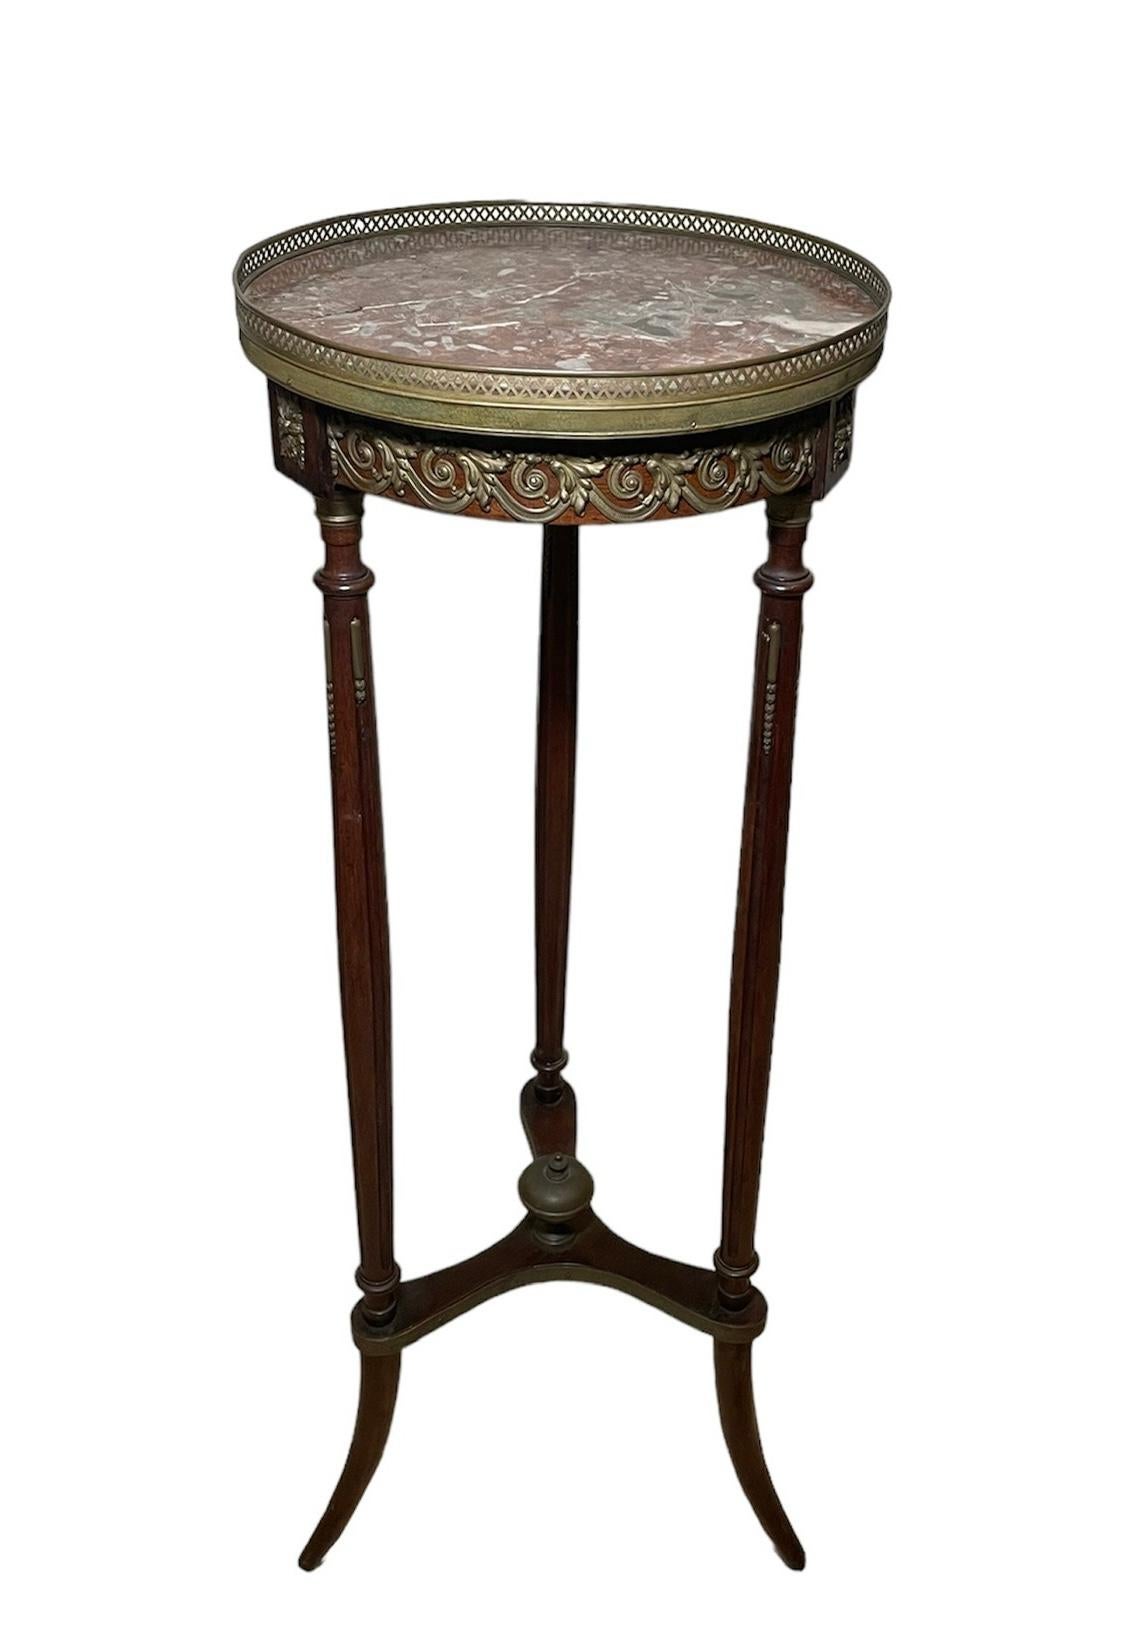 This is a Belle Epoque style Wood and Marble Plant Stand/Table. It depicts a round brown-grey marble top adorned with a gilt brass gallery. The marble is supported by a round dark wood base enhanced by brass made scrolls of acanthus leaves and